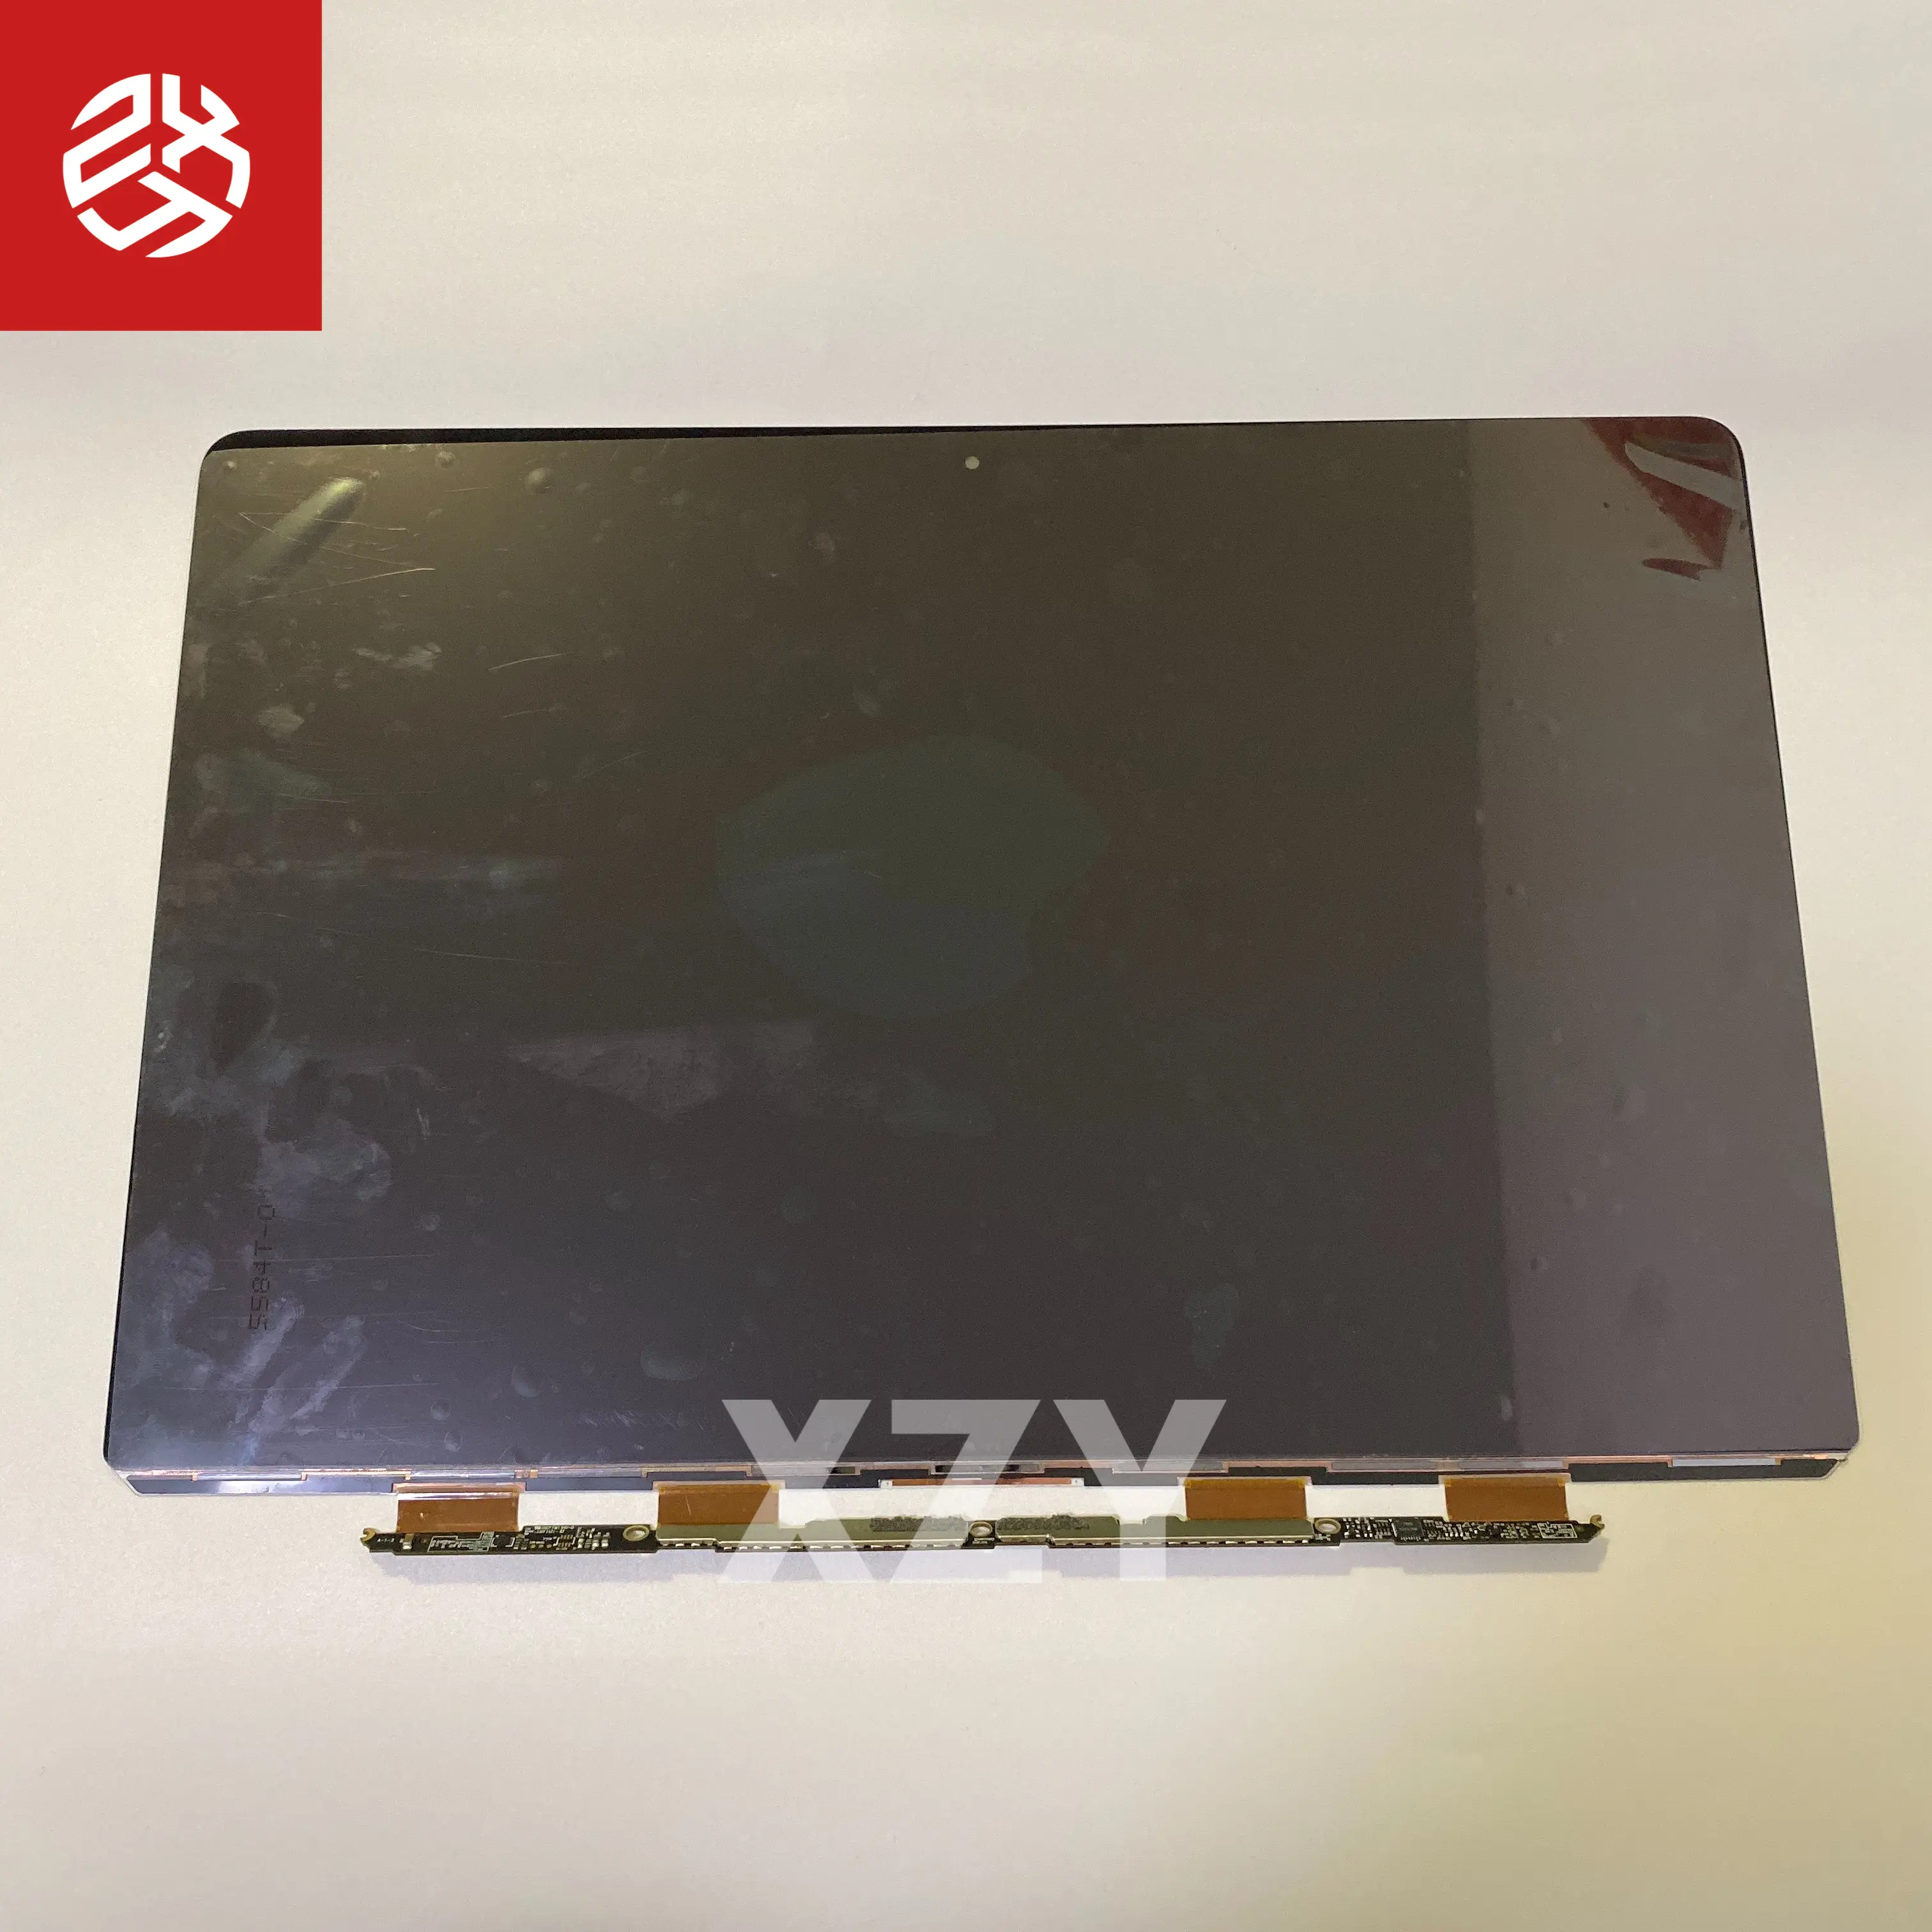 Panel LCD Screen for Macbook Pro 15" Retina A1398 2013 2014